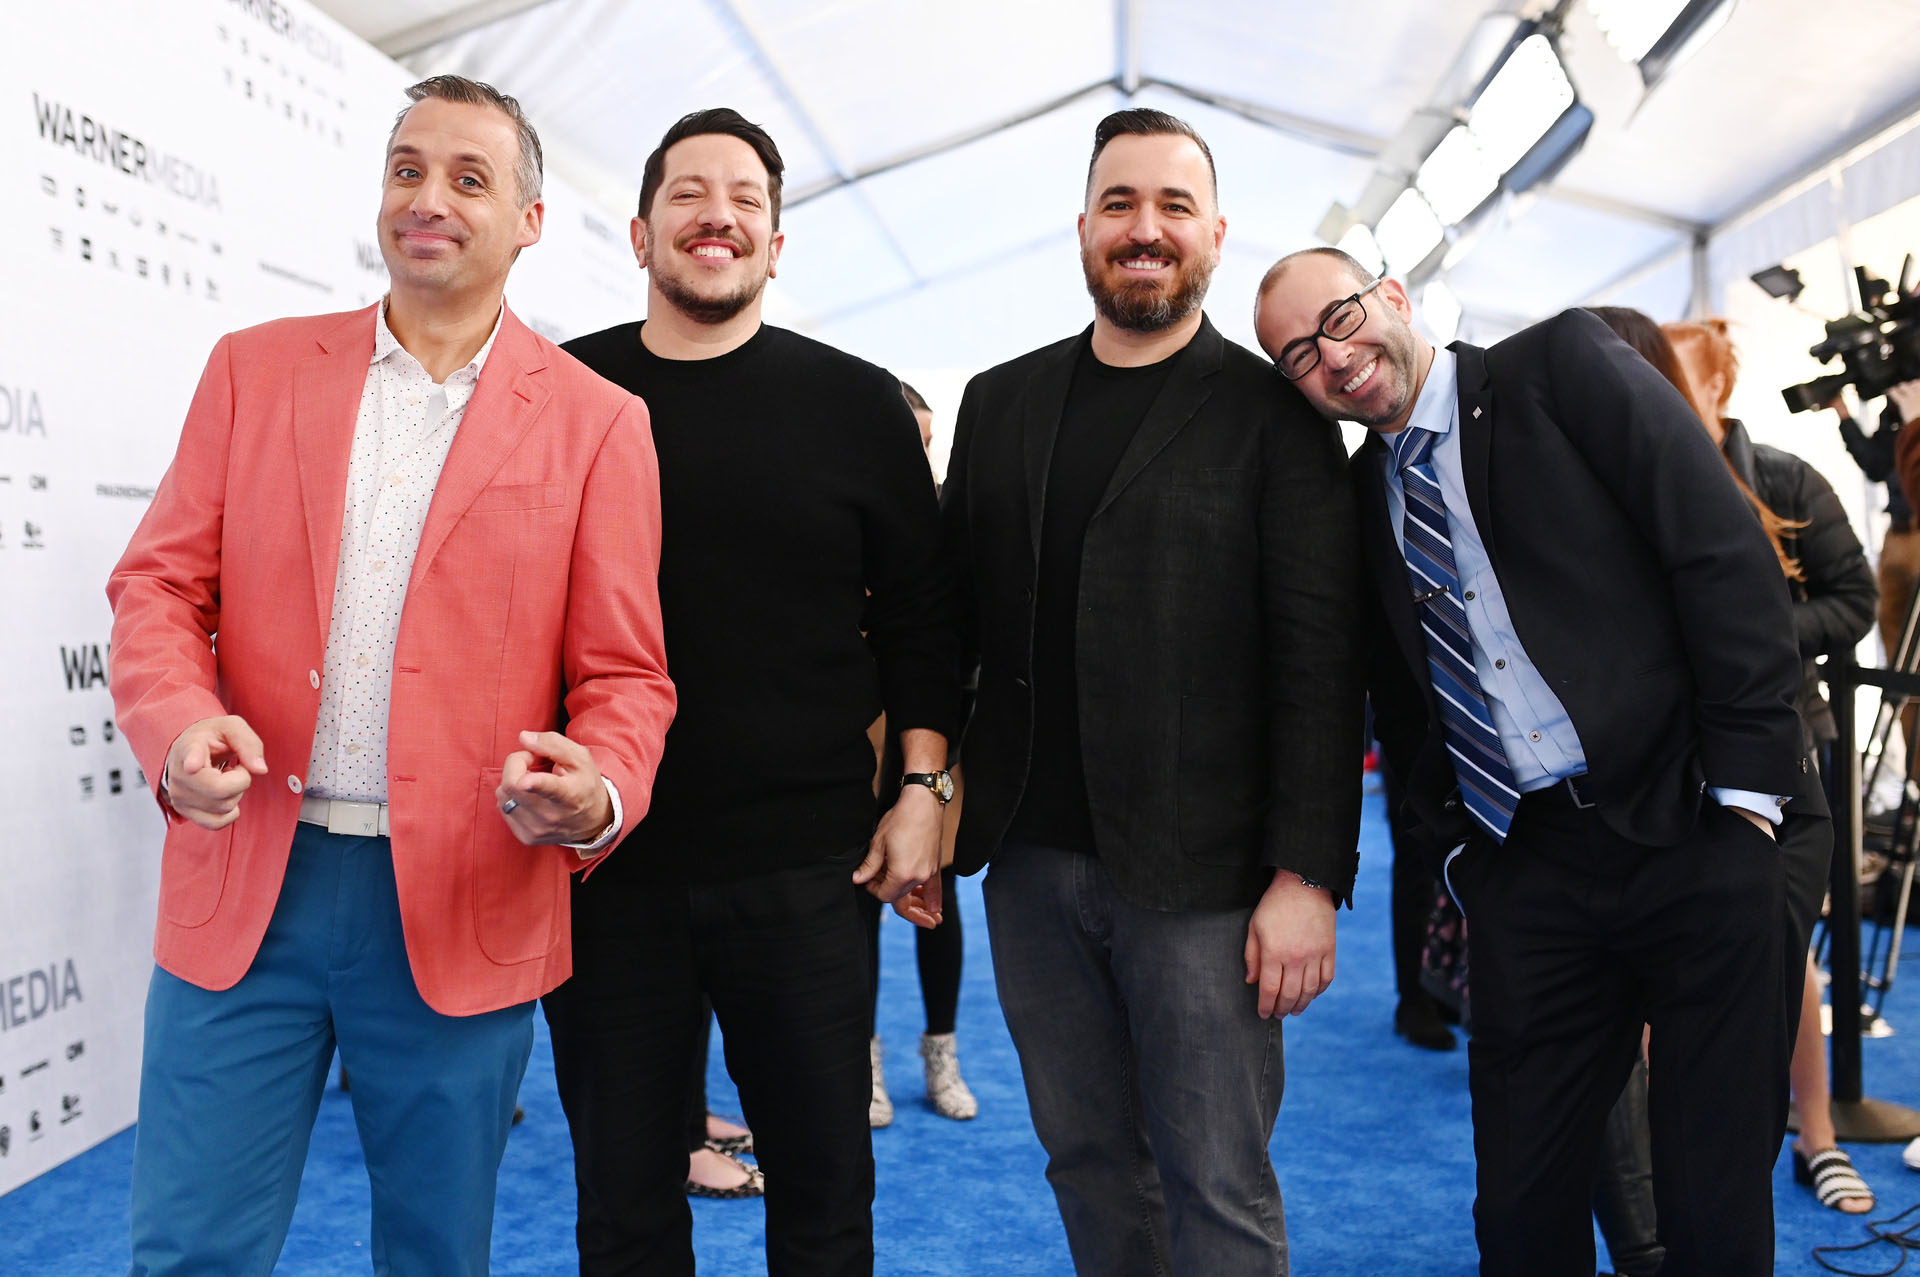 Photos: REVIEW: (Impractical) Jokers Movie Is Imperfect but Amusing